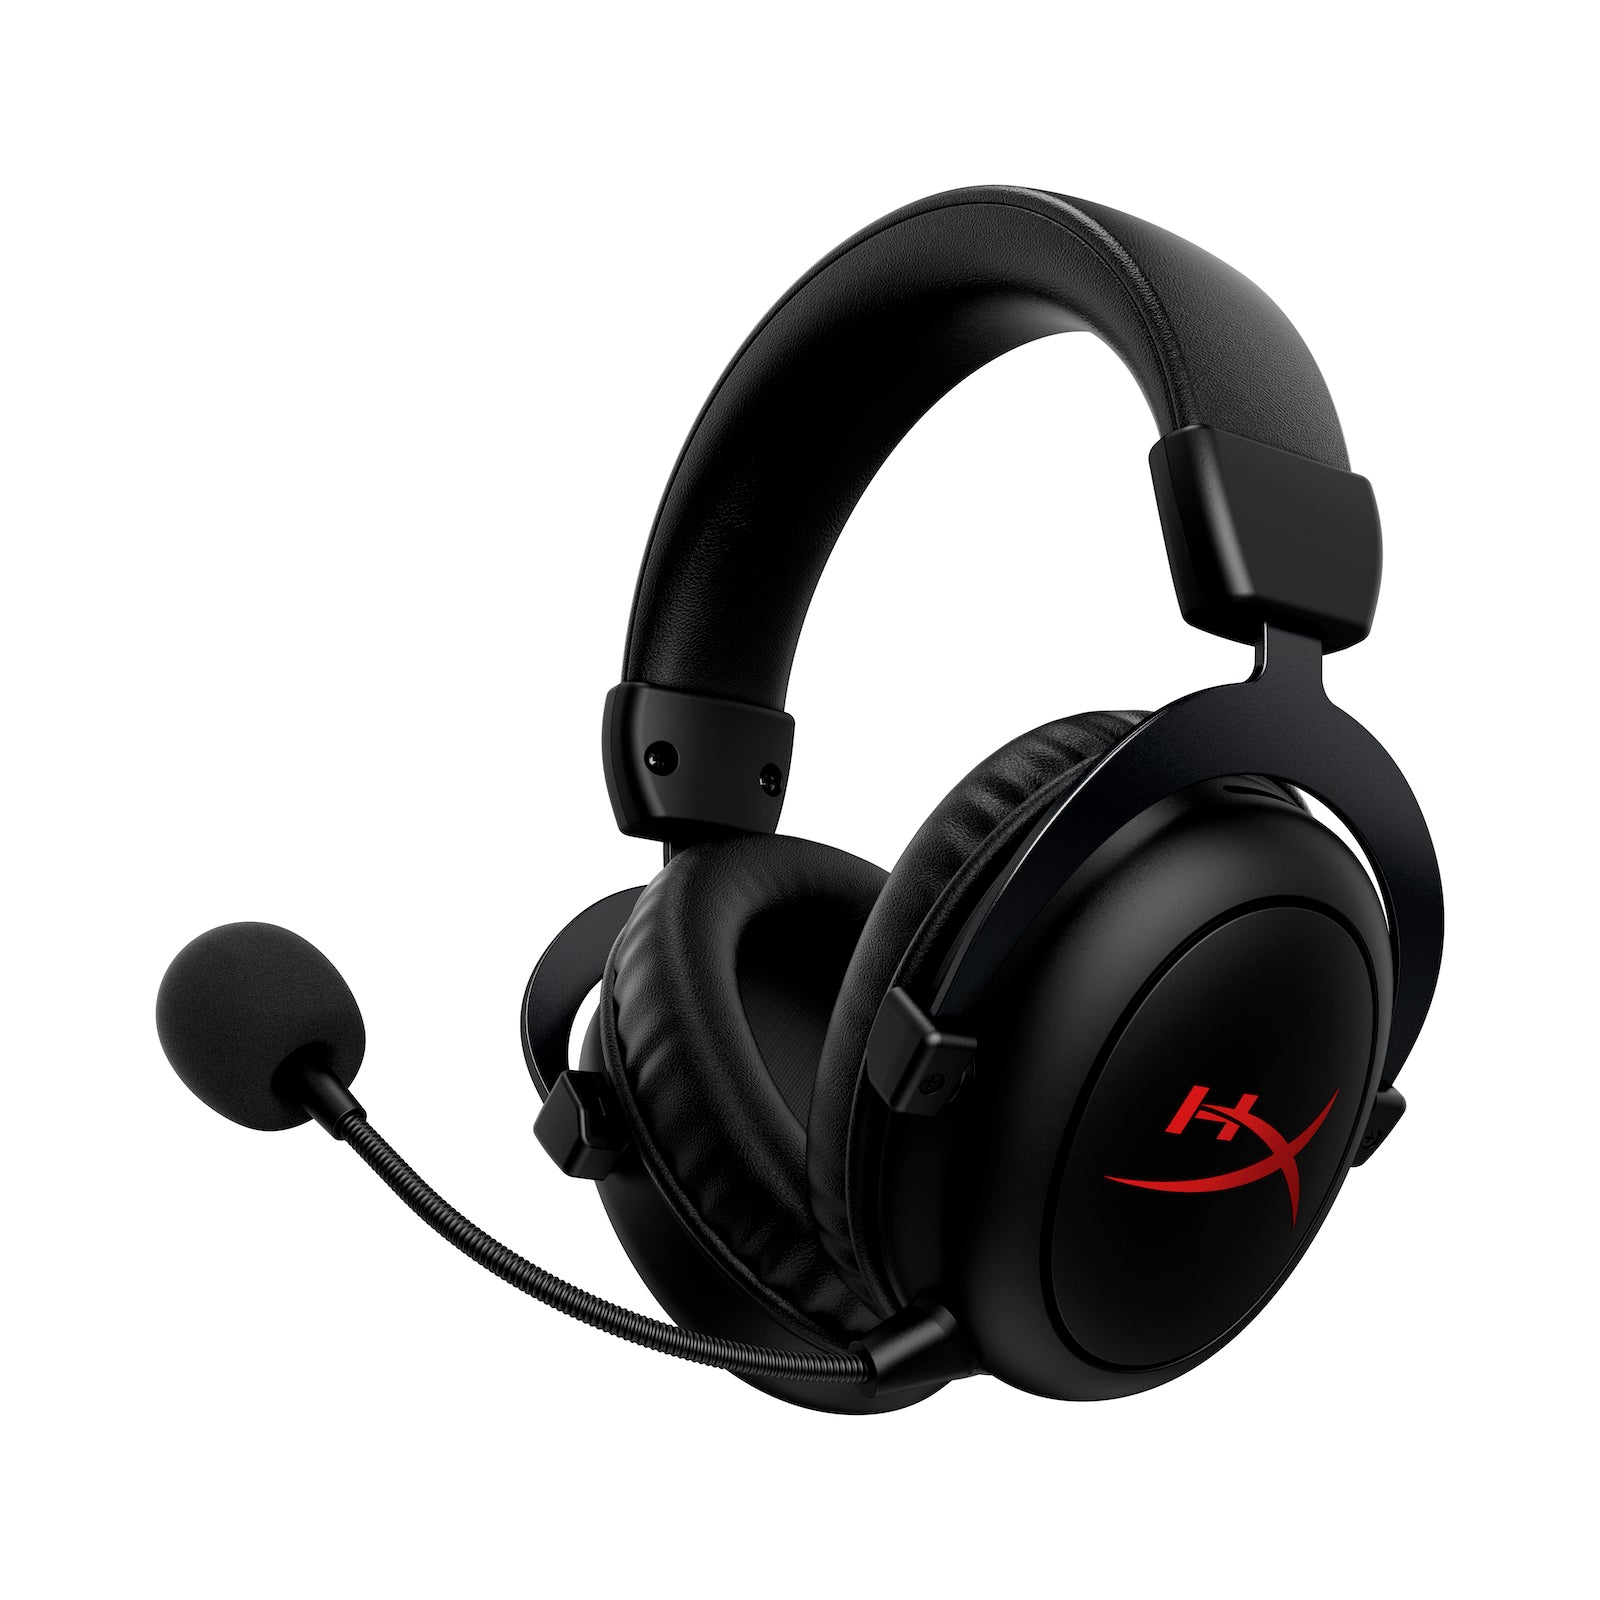 Main left angled view of the HyperX Cloud II Core Wireless Gaming Headset